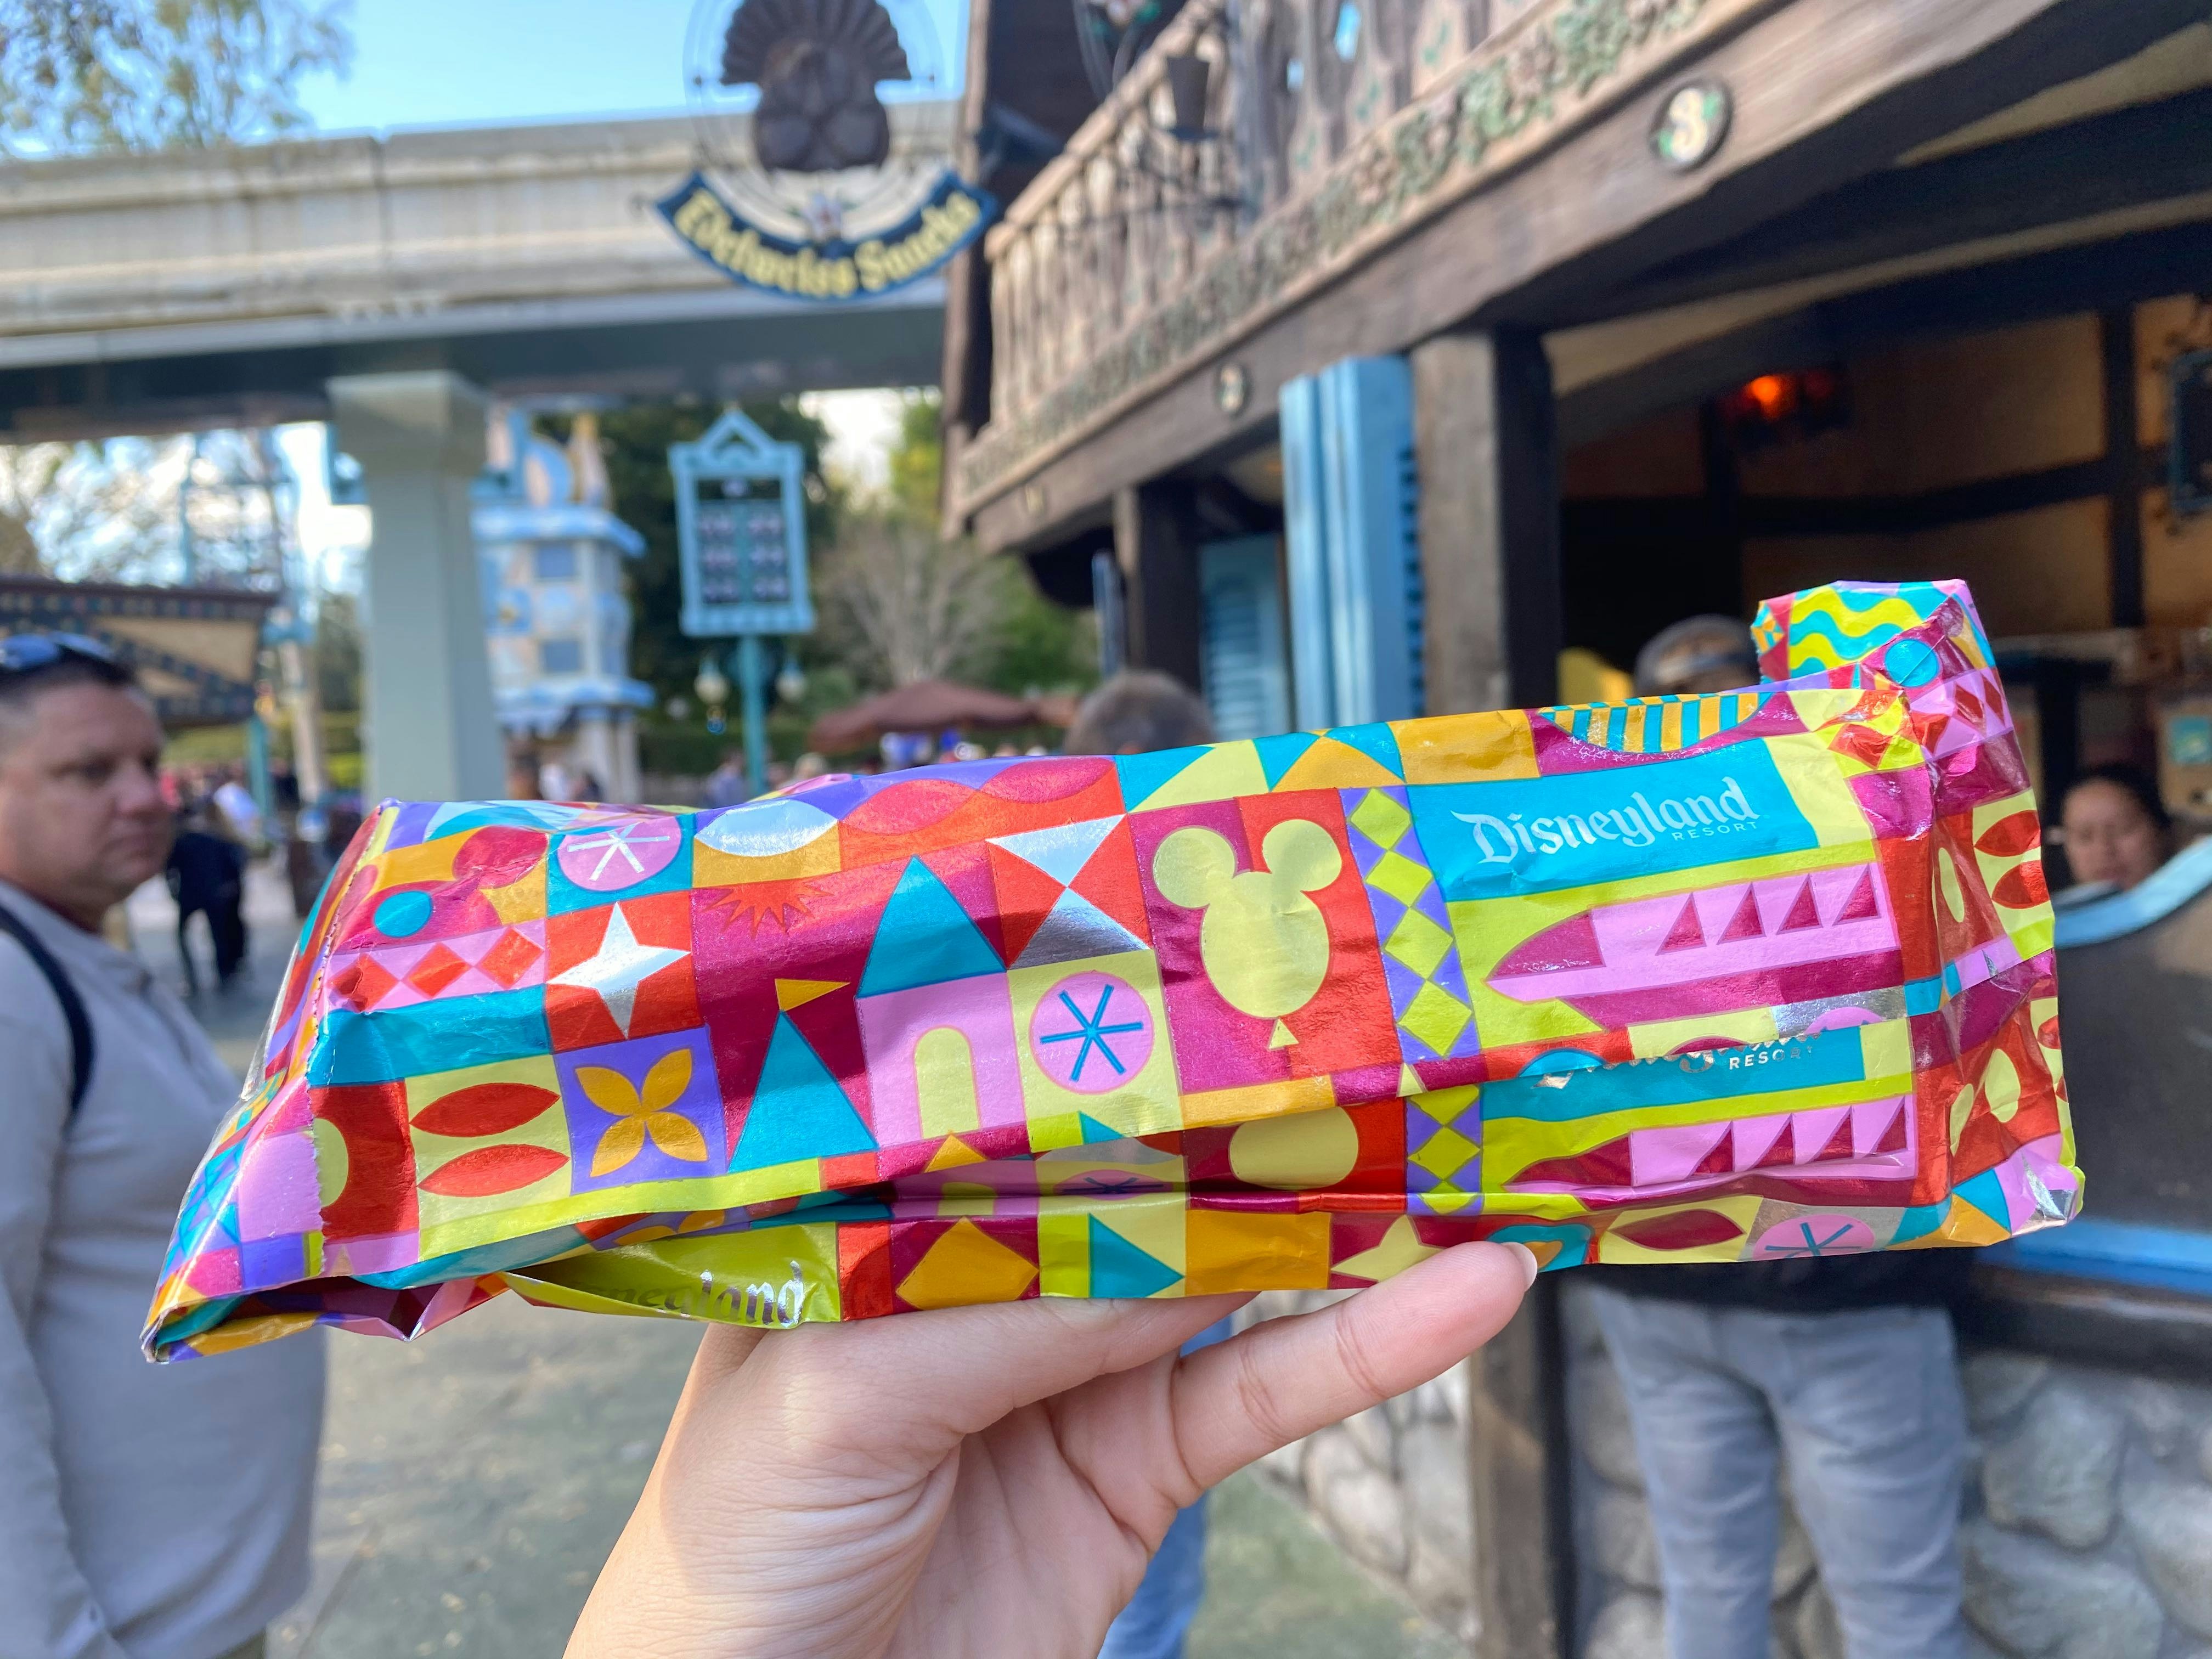 Colorful New Food Wrapping Bring a Pop of Color to Disneyland Snacks